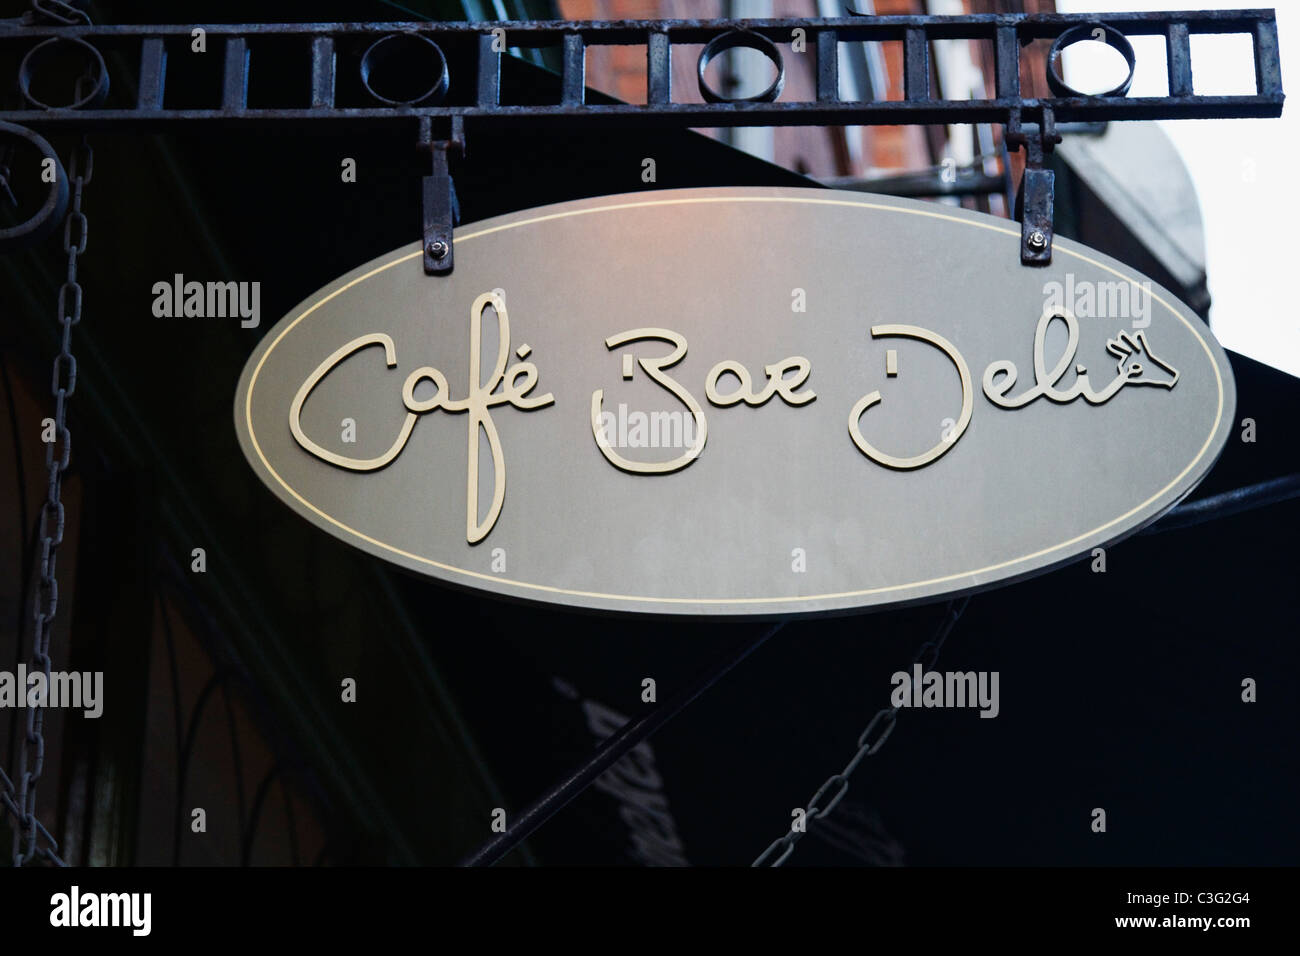 Low angle view of a signboard of a cafe, Cafe Bar Deli, Dublin, Republic of Ireland Stock Photo